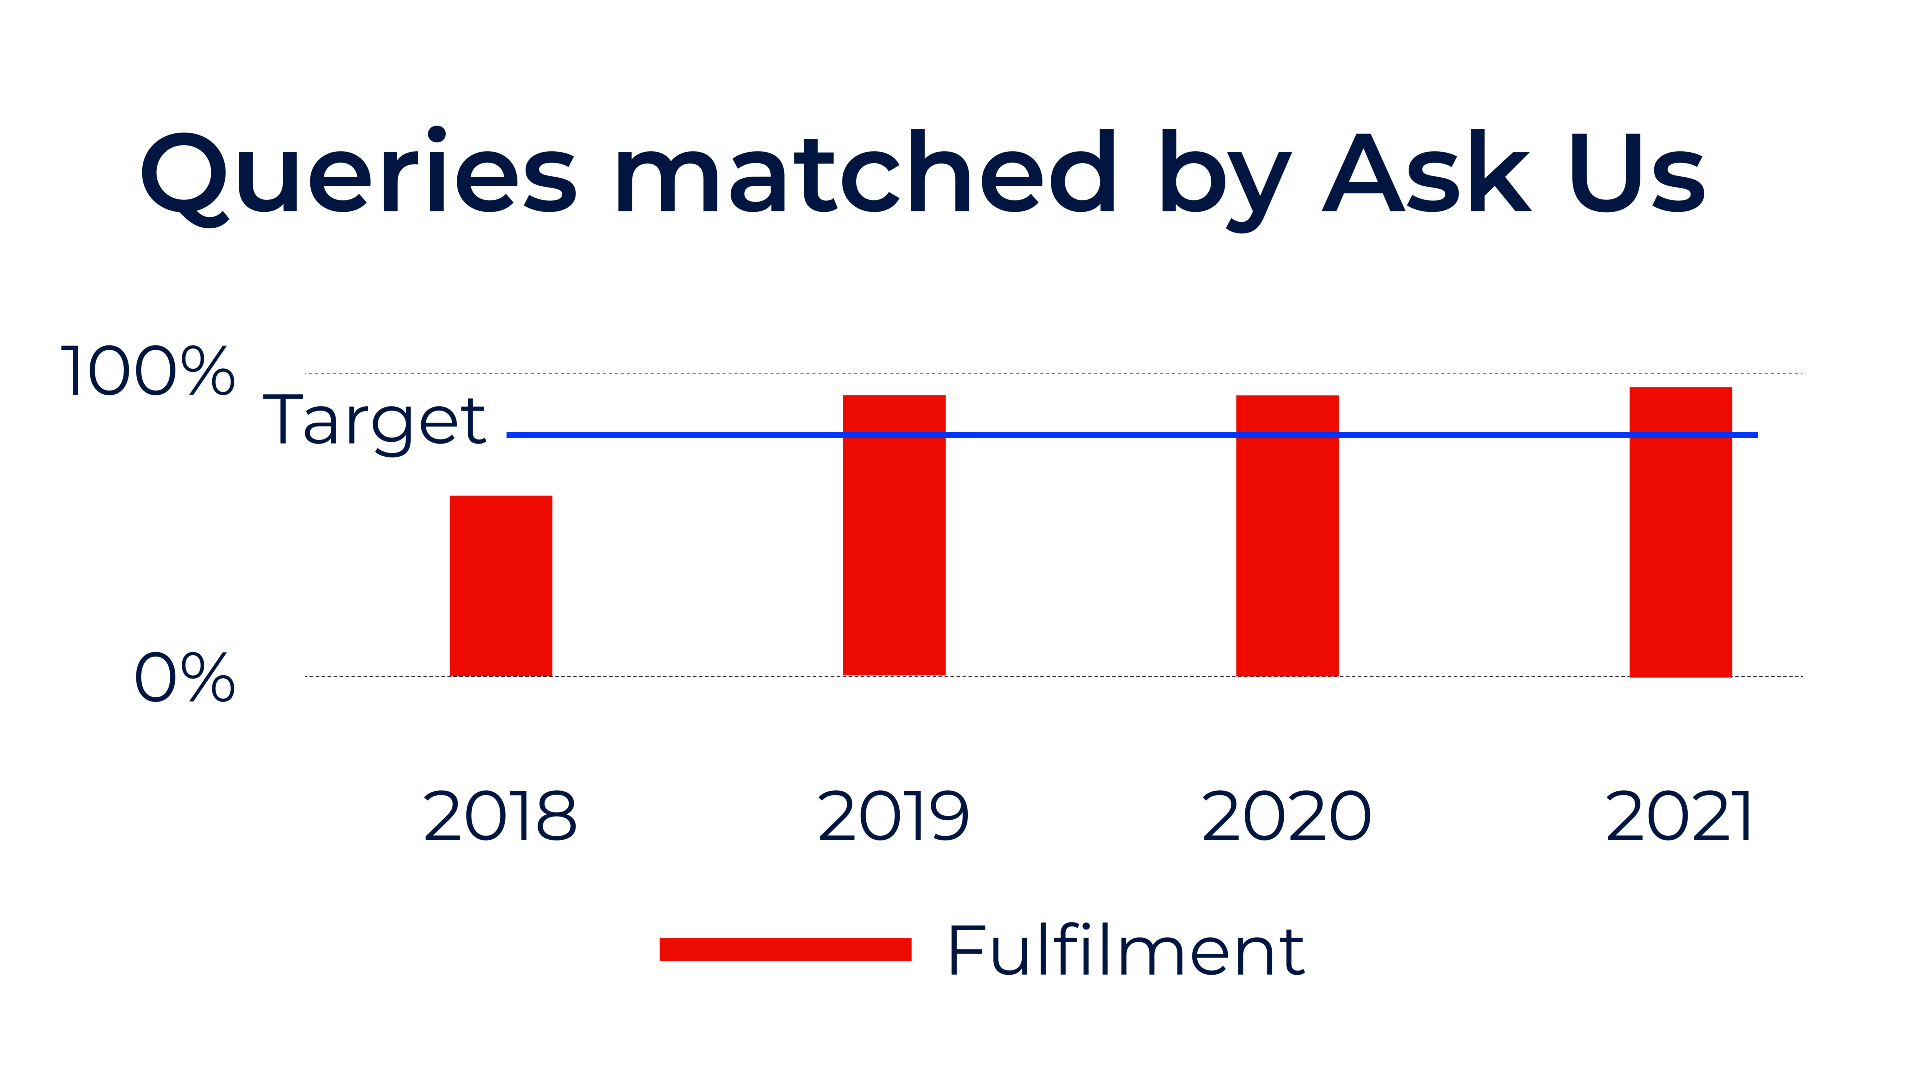 Column graph showing approx. 95% of queries matched by Ask Us from 2019-2021.